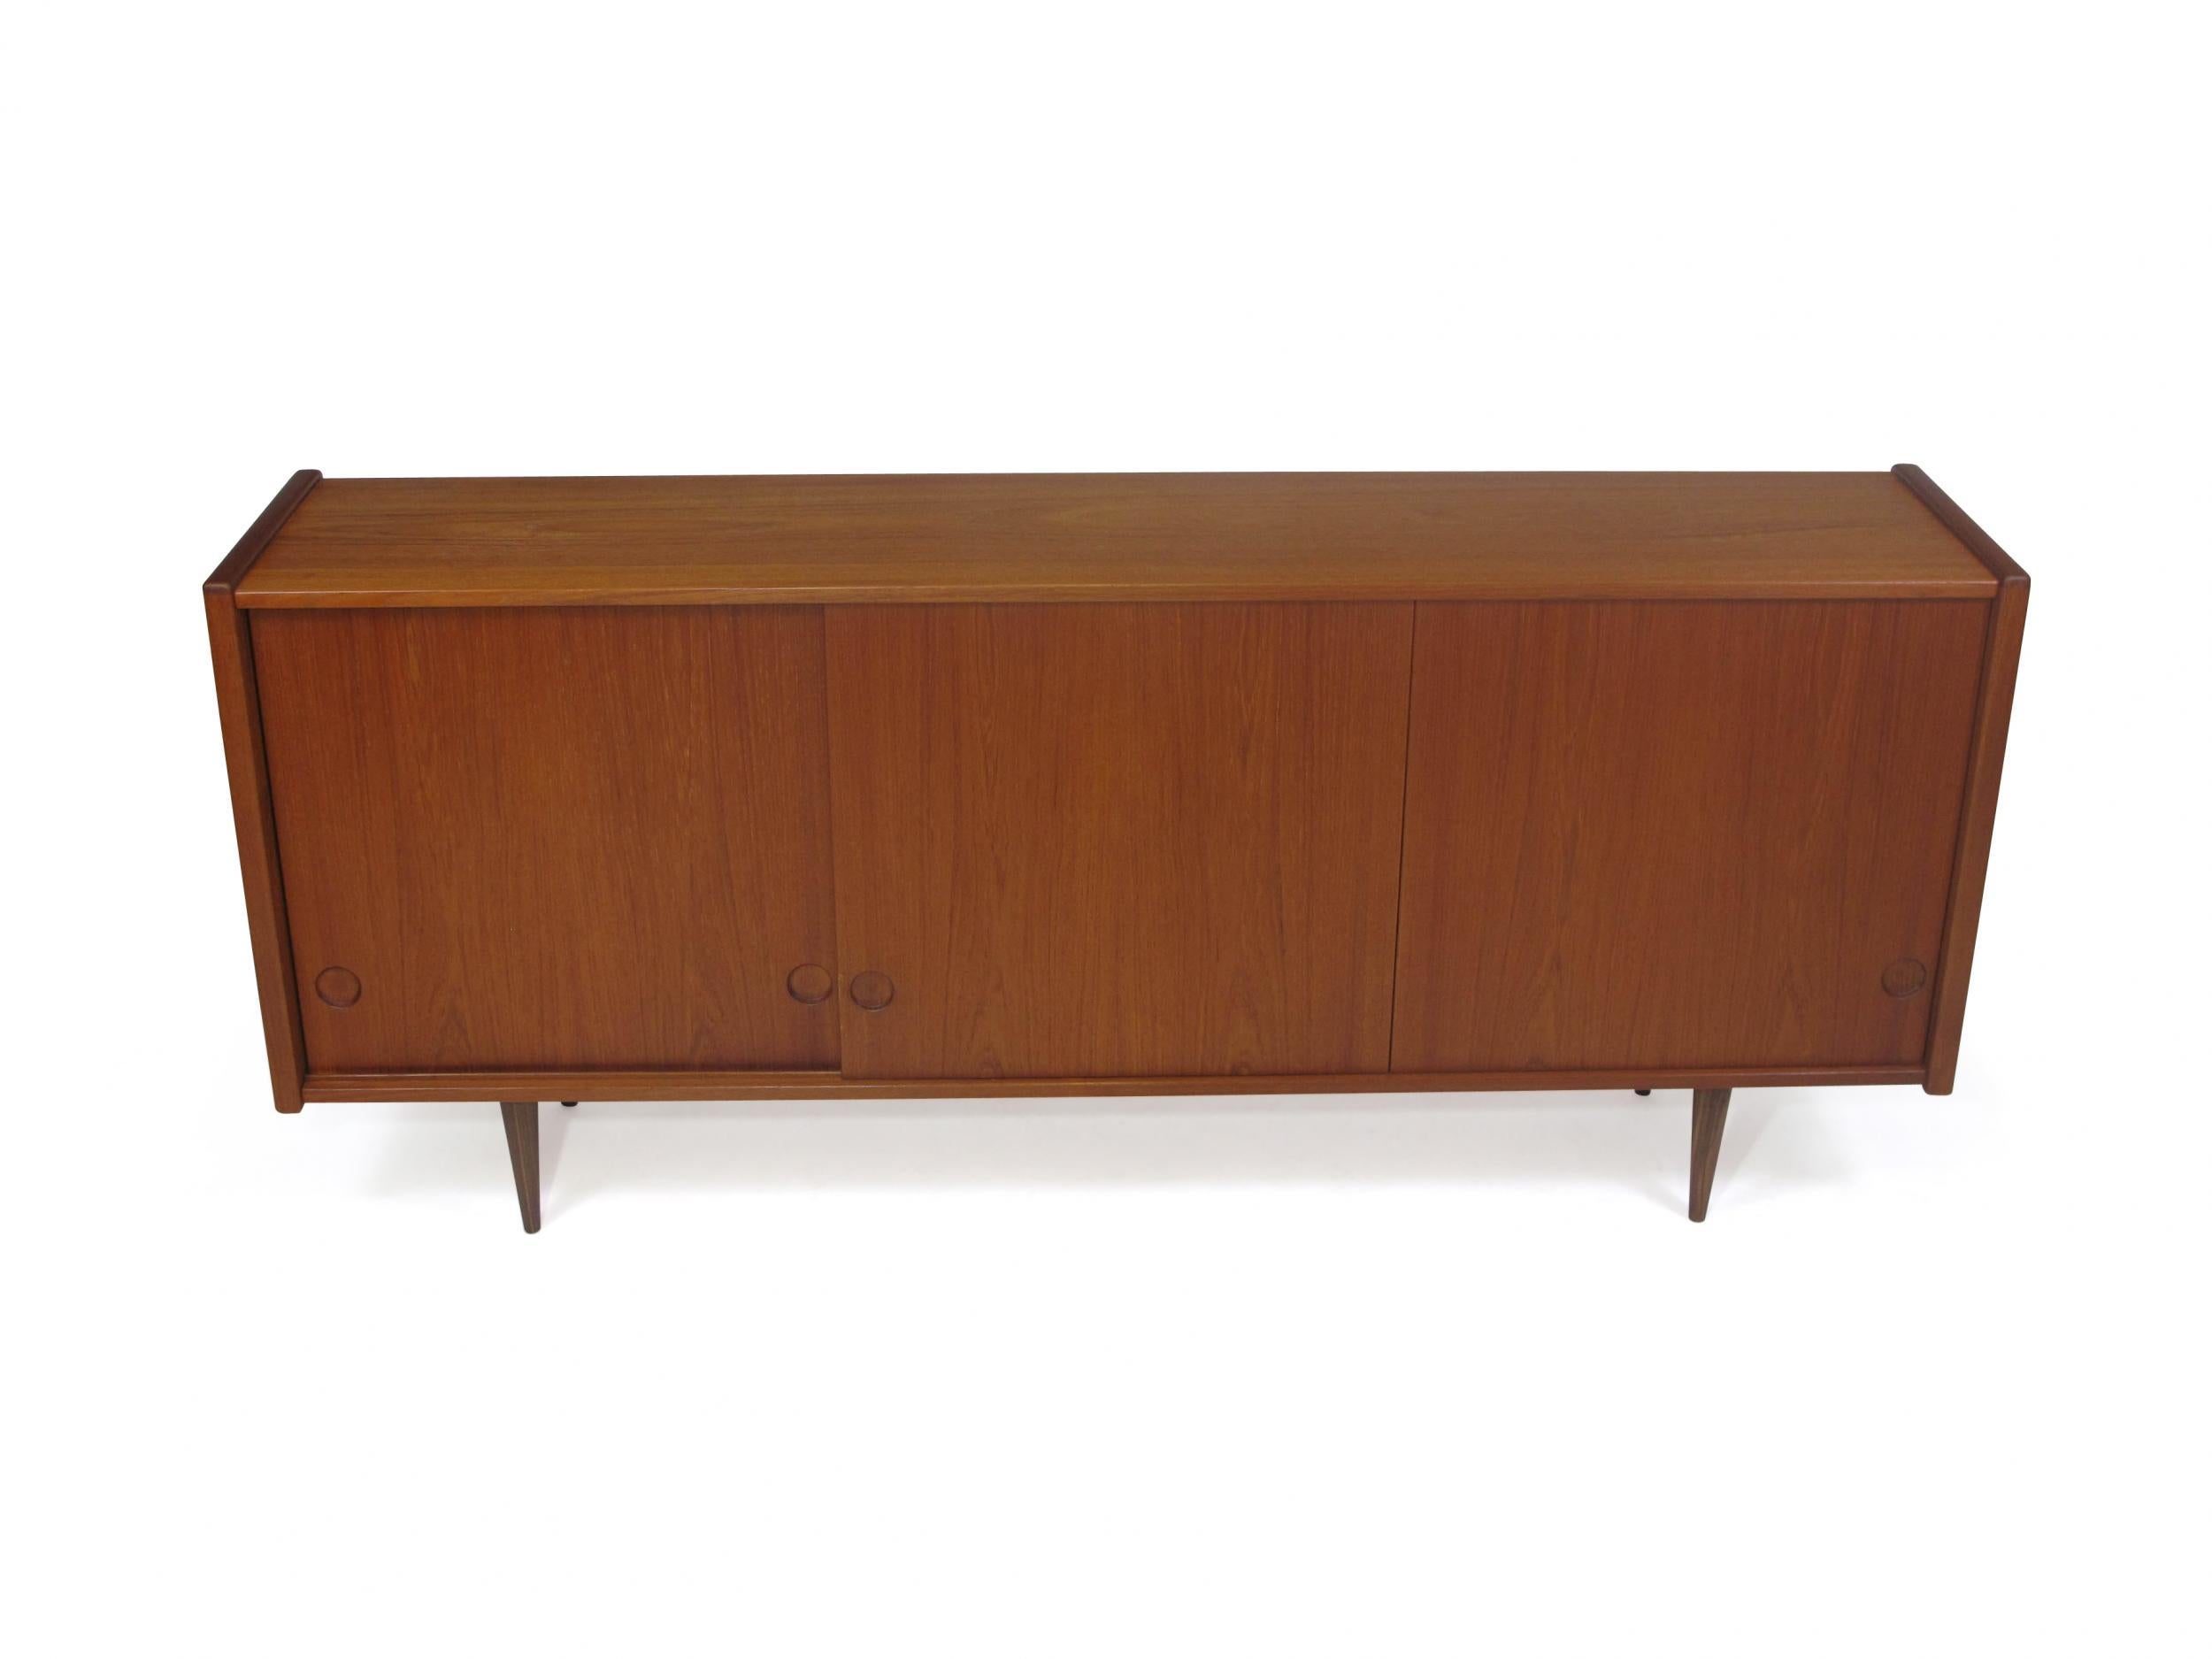 Oiled Danish Teak Credenza with Sliding Doors and Drawers